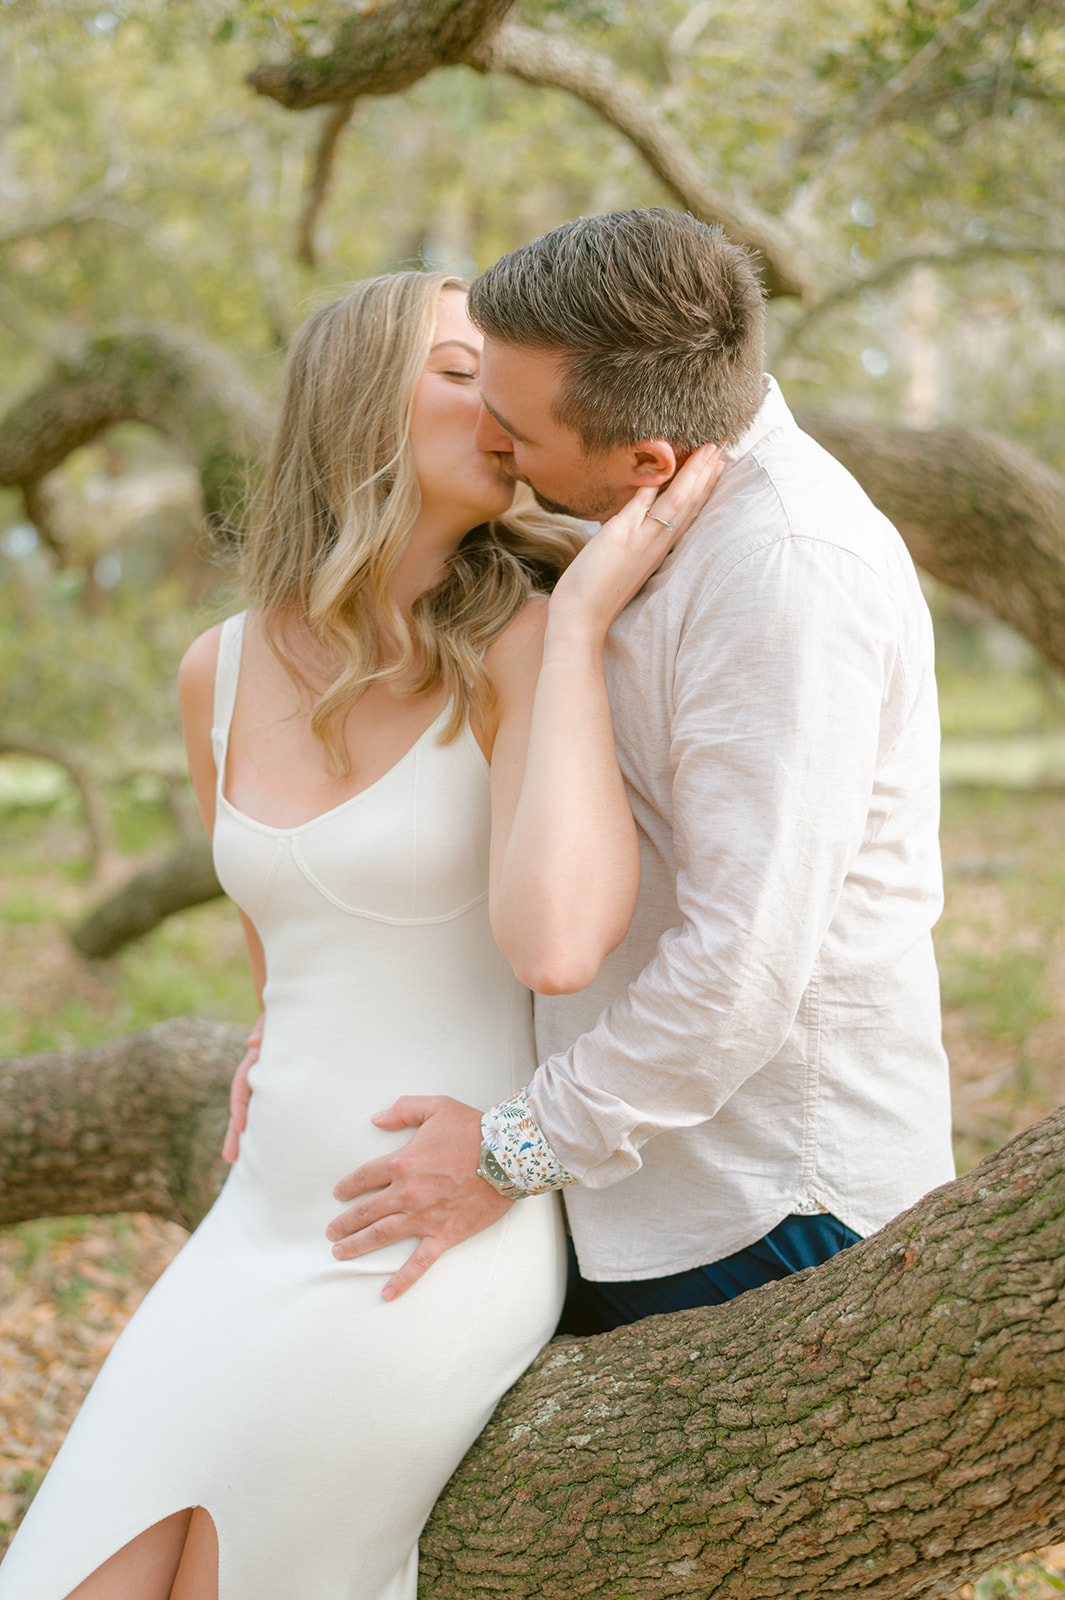 "Sunny and breezy engagement session at Philippe Park, Tampa Florida"
